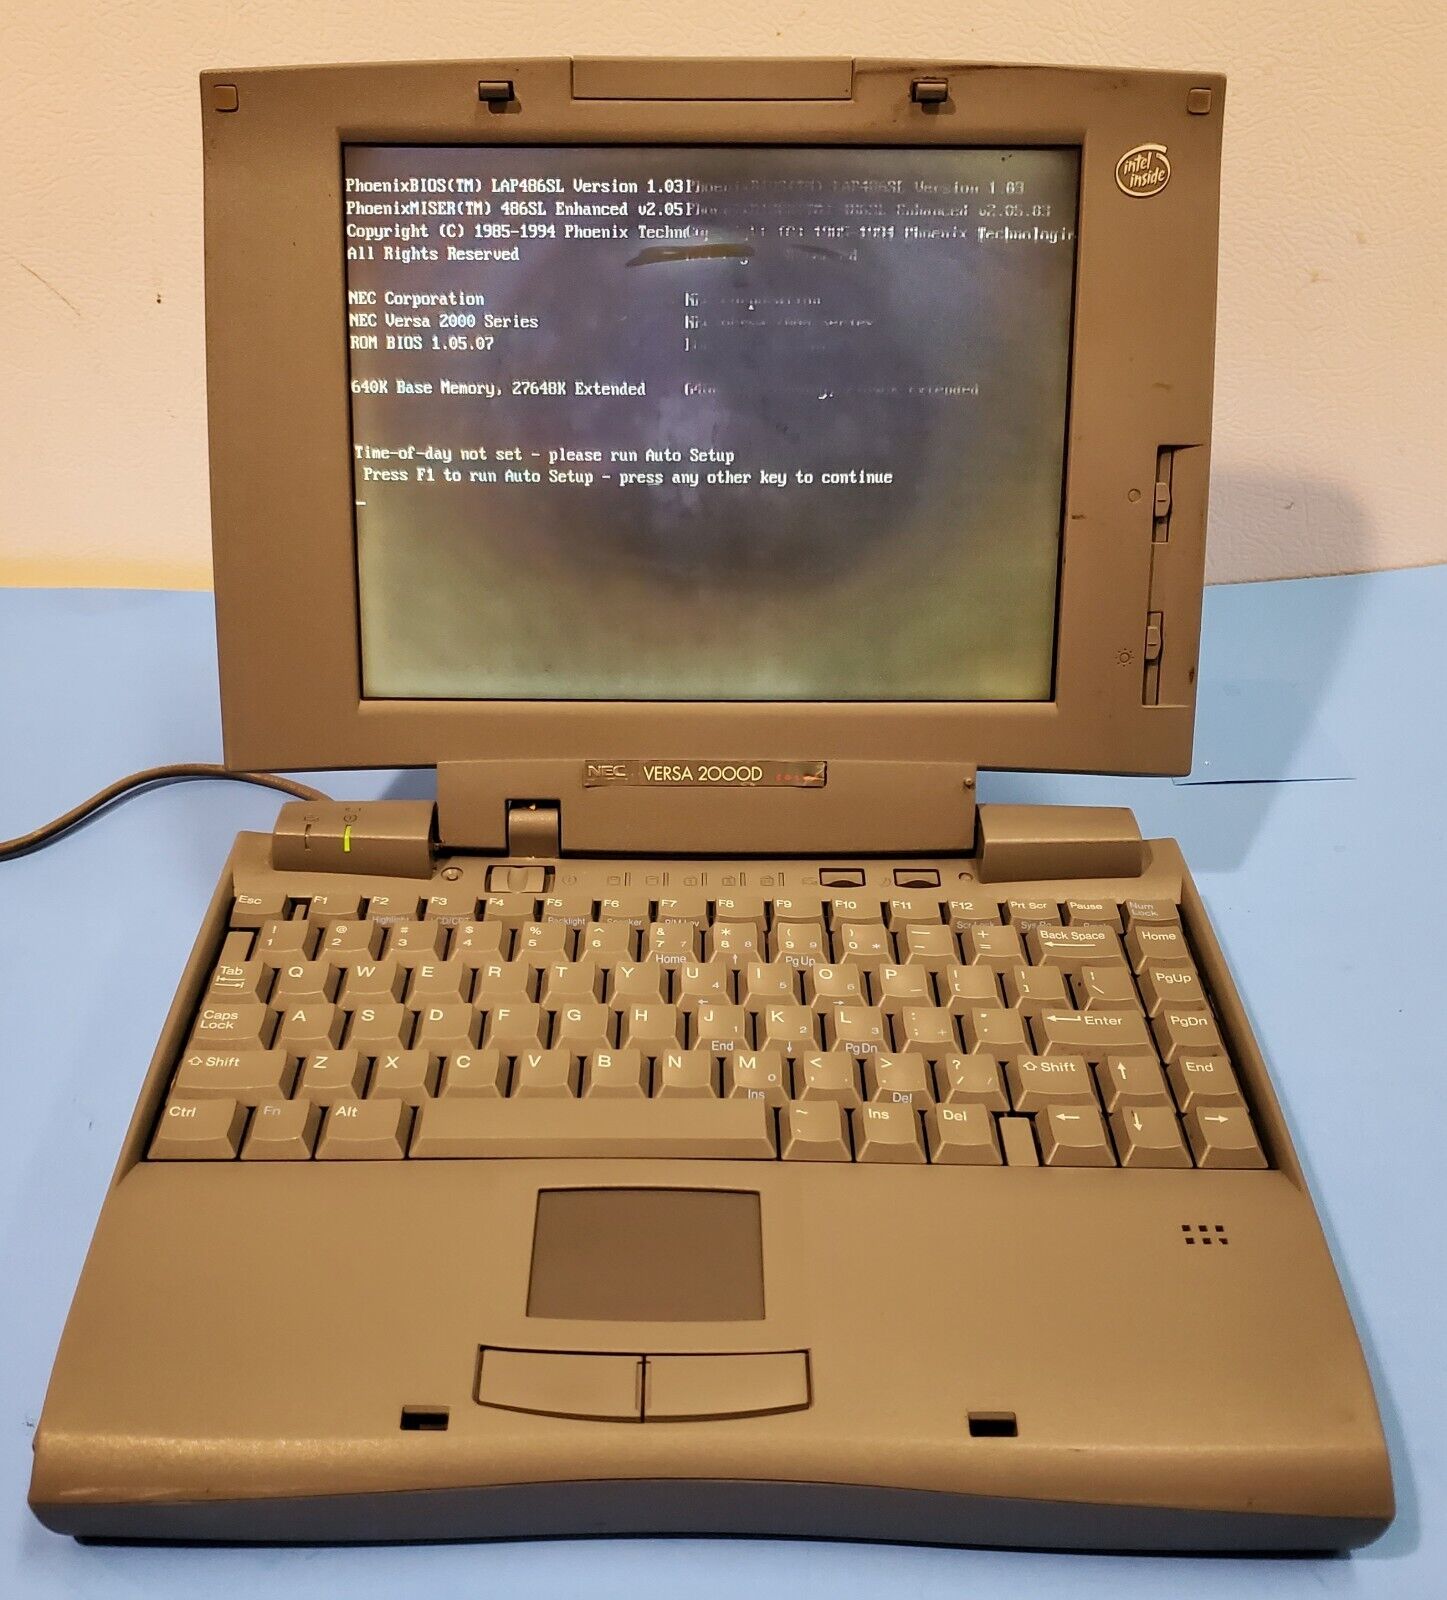 VINTAGE NEC Versa 2000D Laptop Computer  - Powers On - Sold As Is